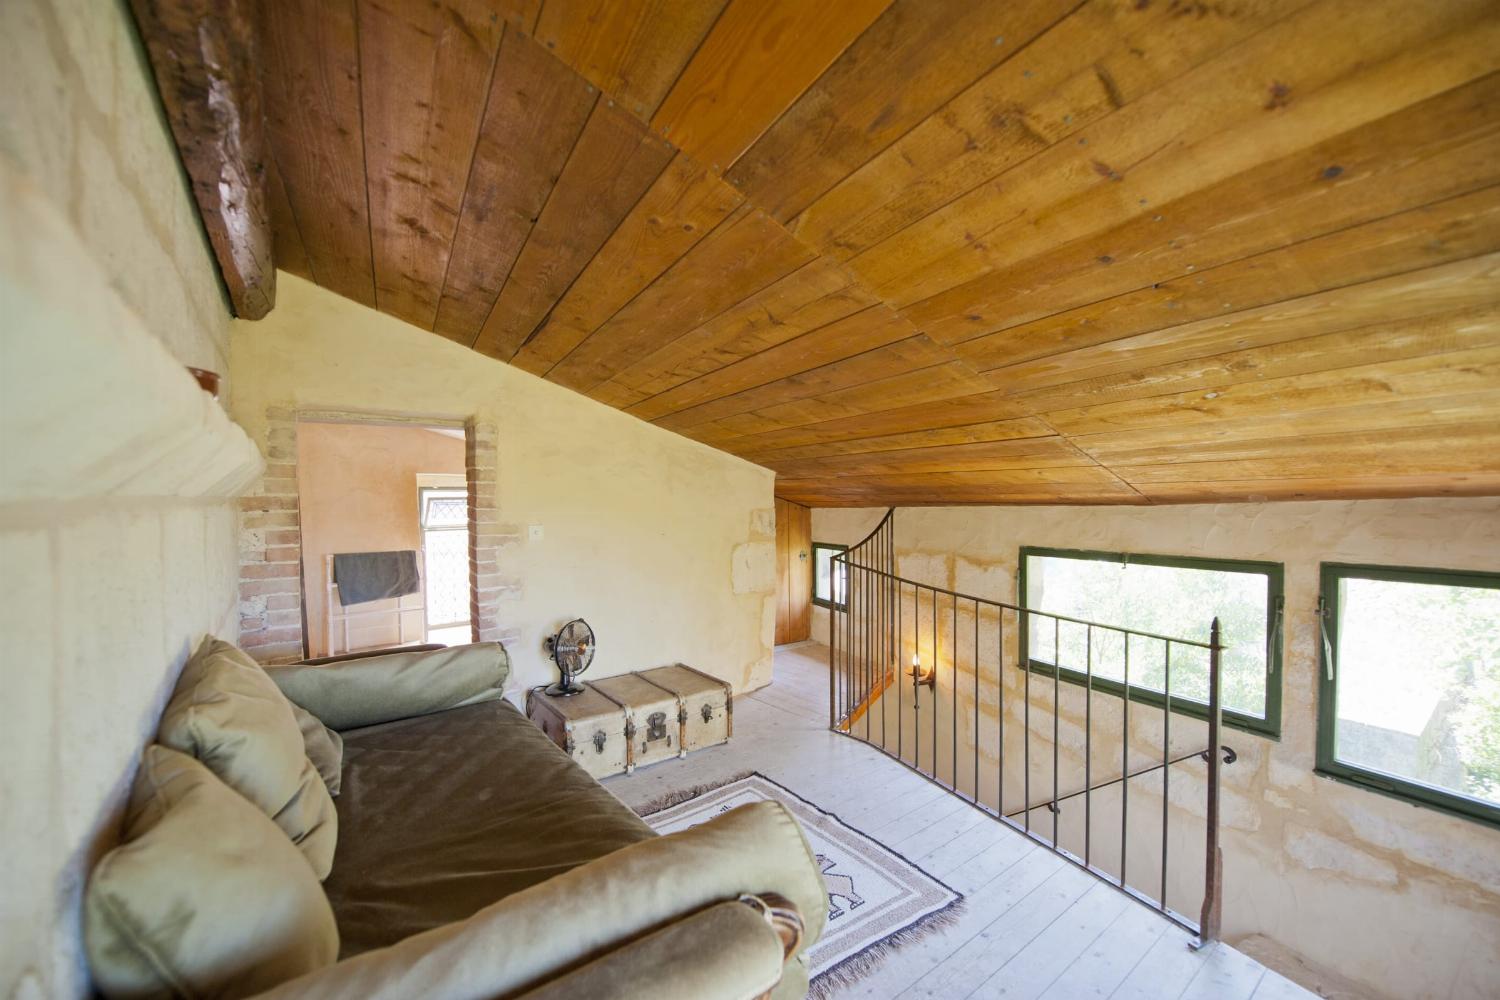 Mezzanine | Rental home in South of France